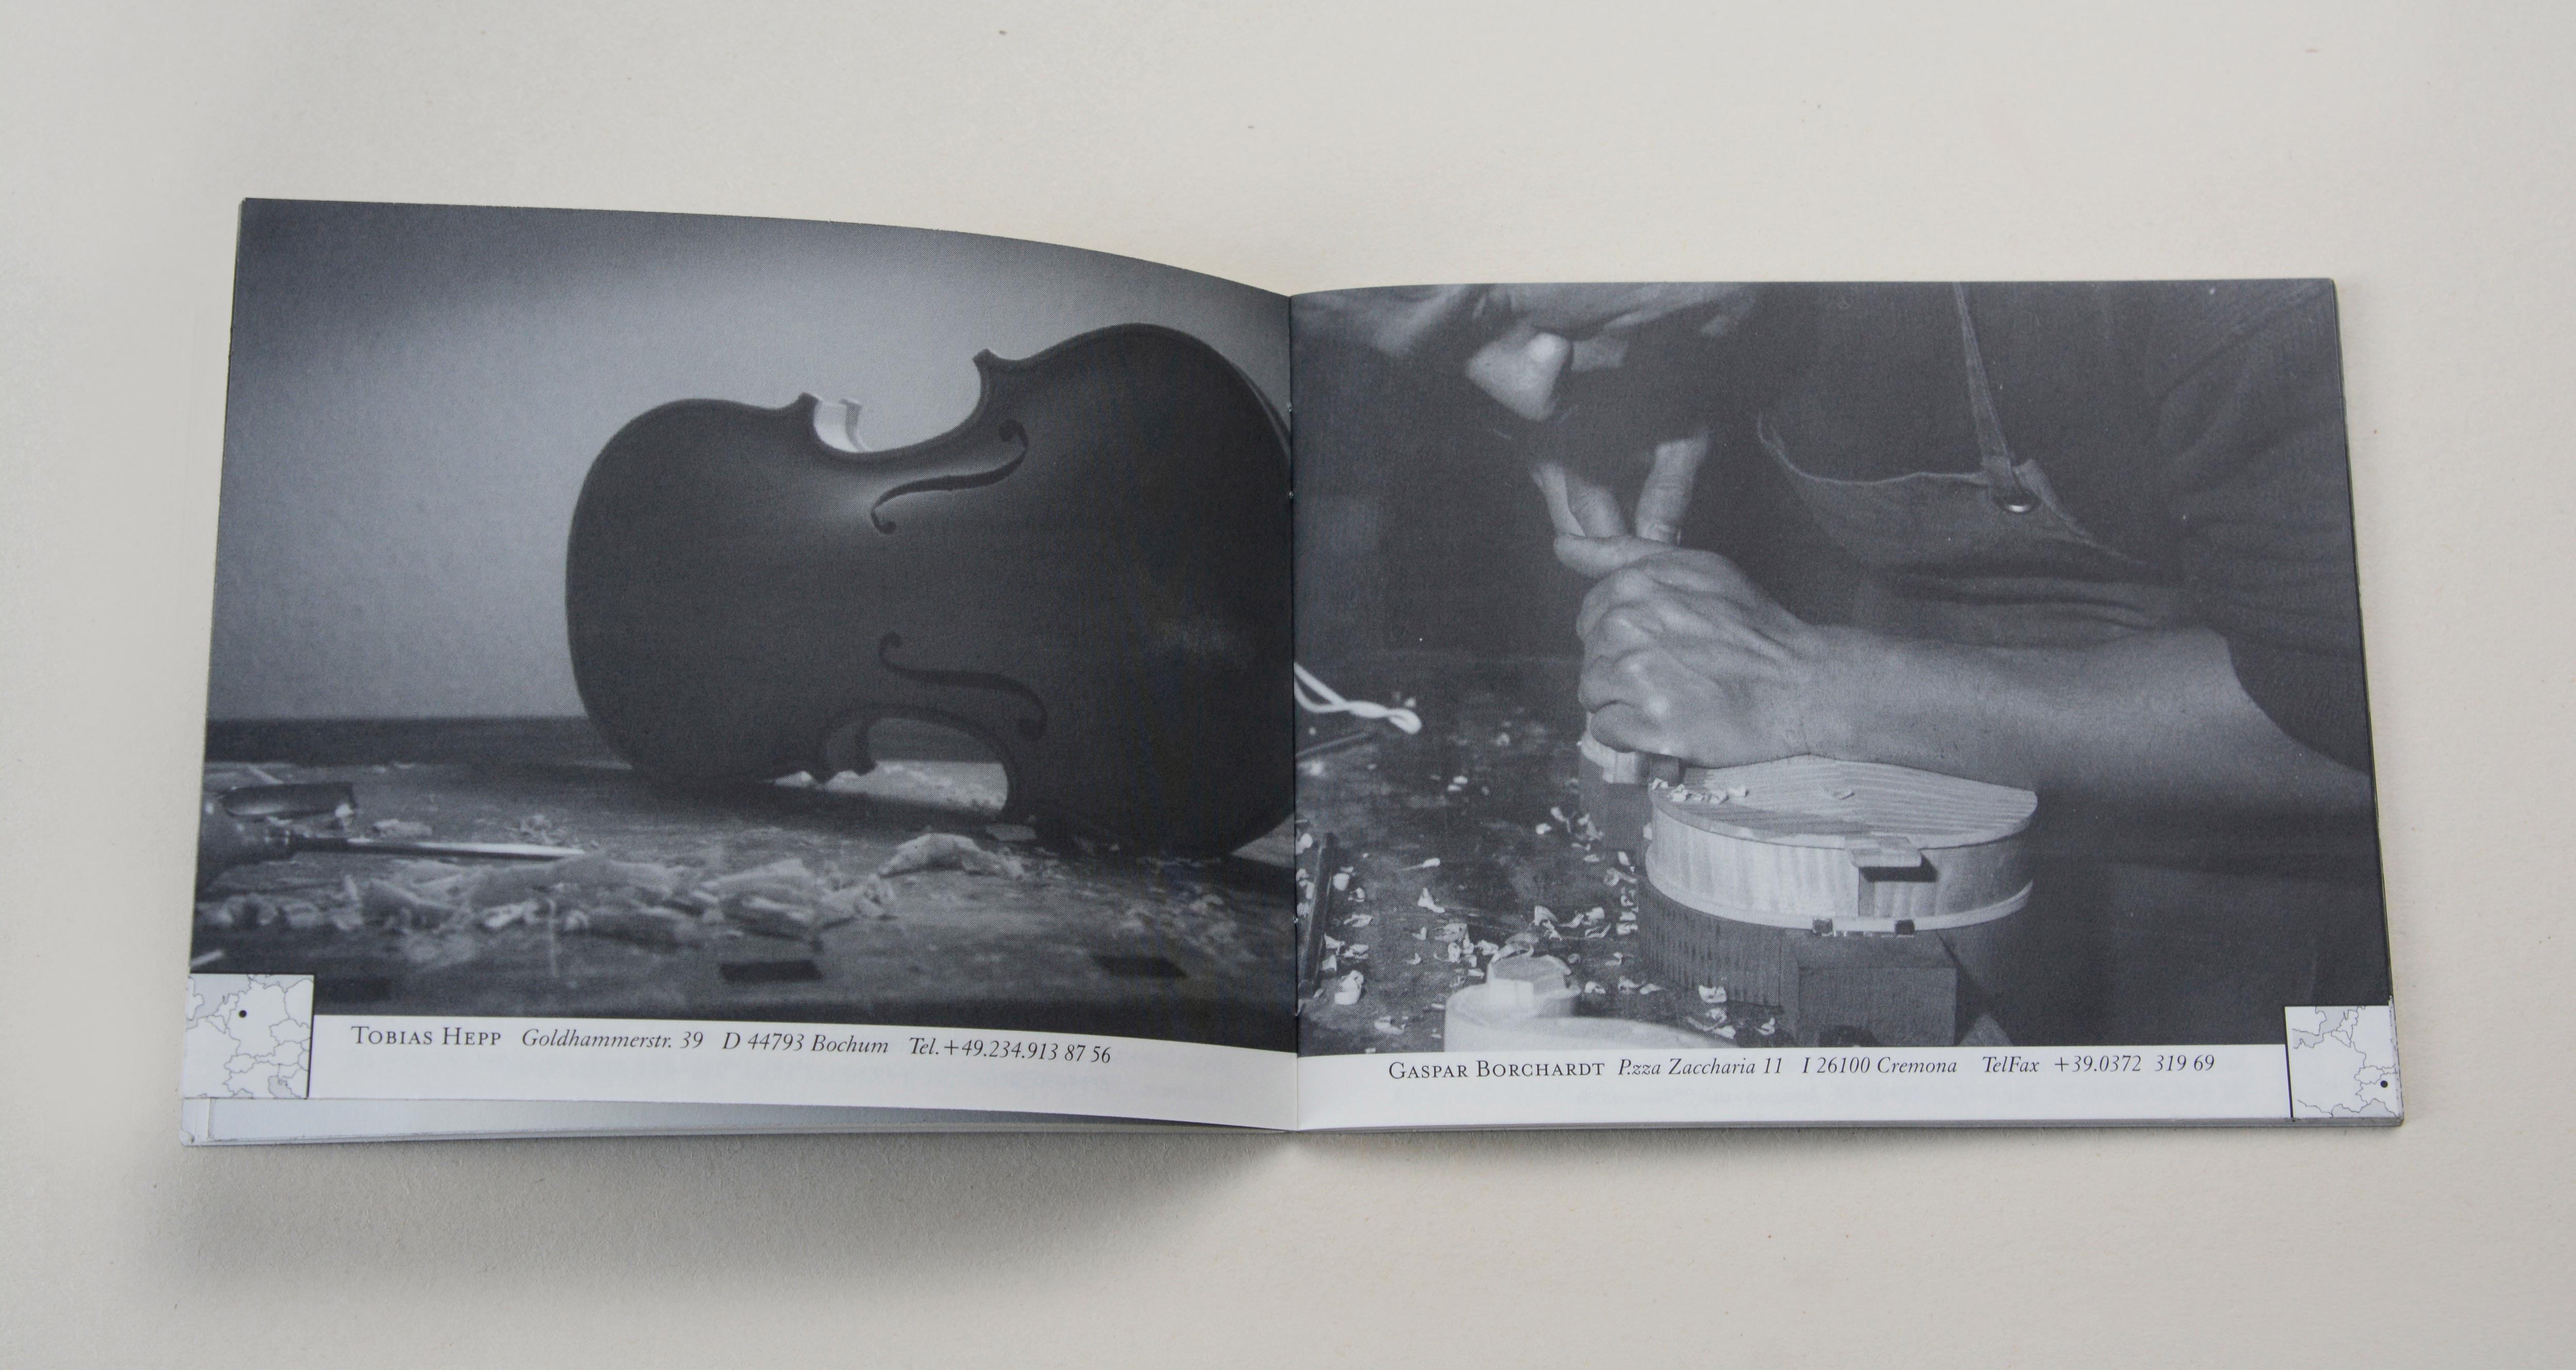 Double page. On each page full-page b/w photos. Thumbnail sized map with marking point at bottom corner. Line of small text in white space underneath. Left: Violin body on workbench. Right: Man carving on a violin body.